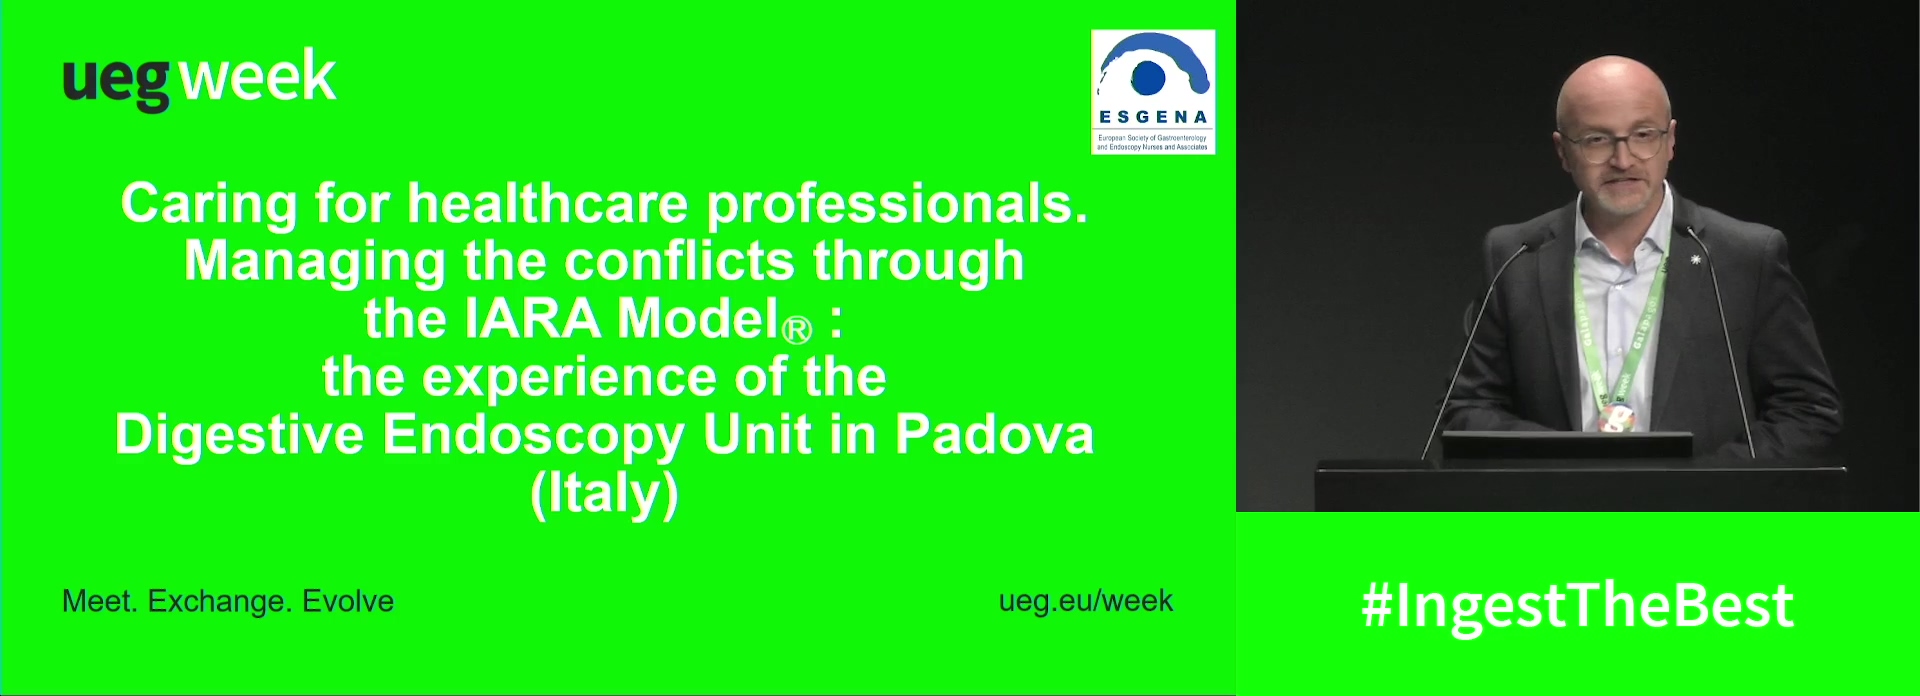 Caring for healthcare professionals. Managing the conflicts through the IARA Model: The experience of the Digestive Endoscopy Unit in Padova (Italy)